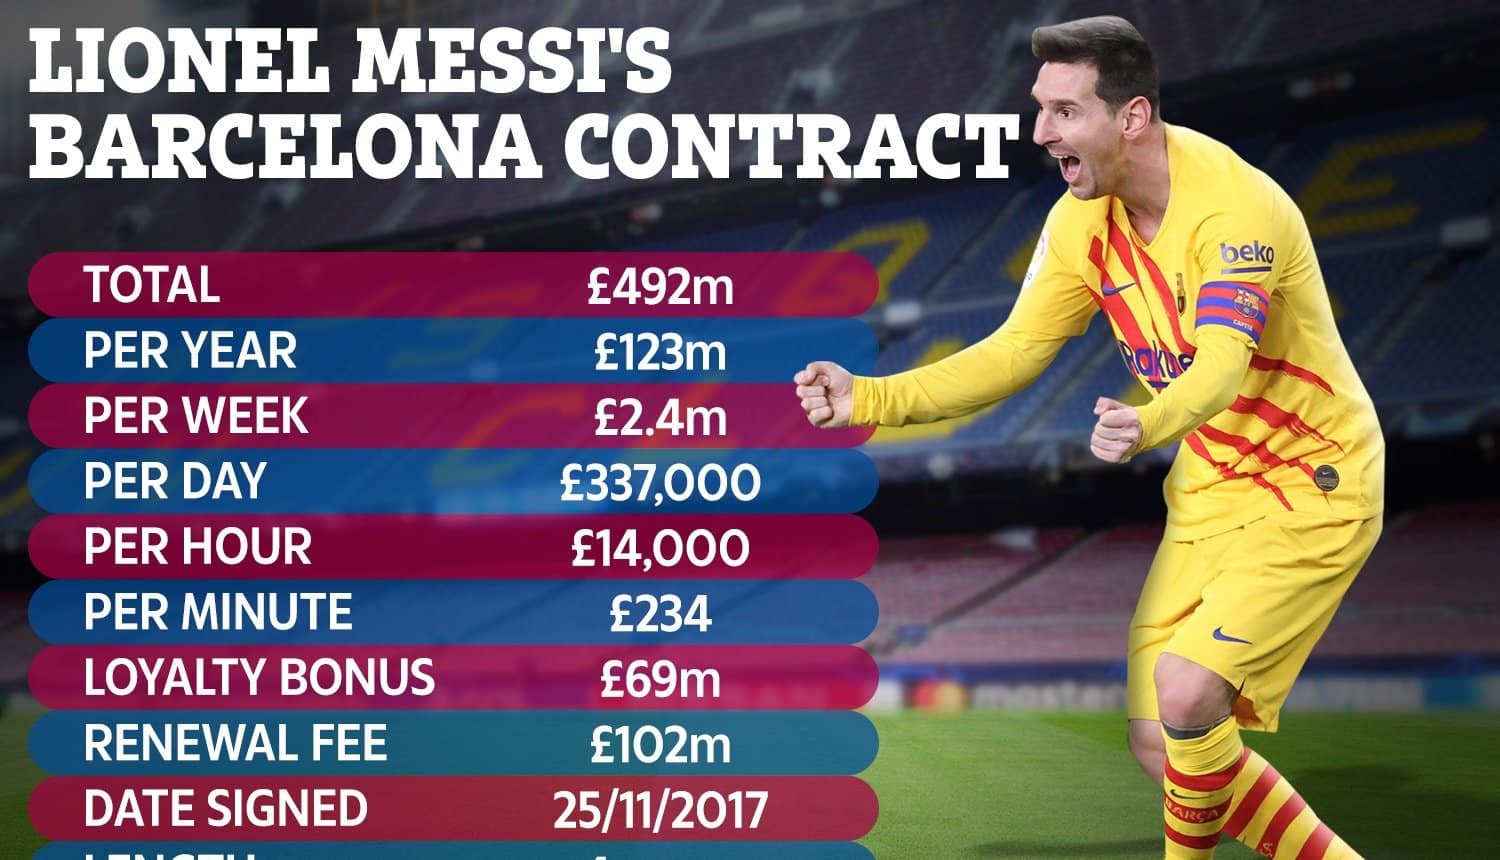 Messi extends contact with Barcelona for another two years